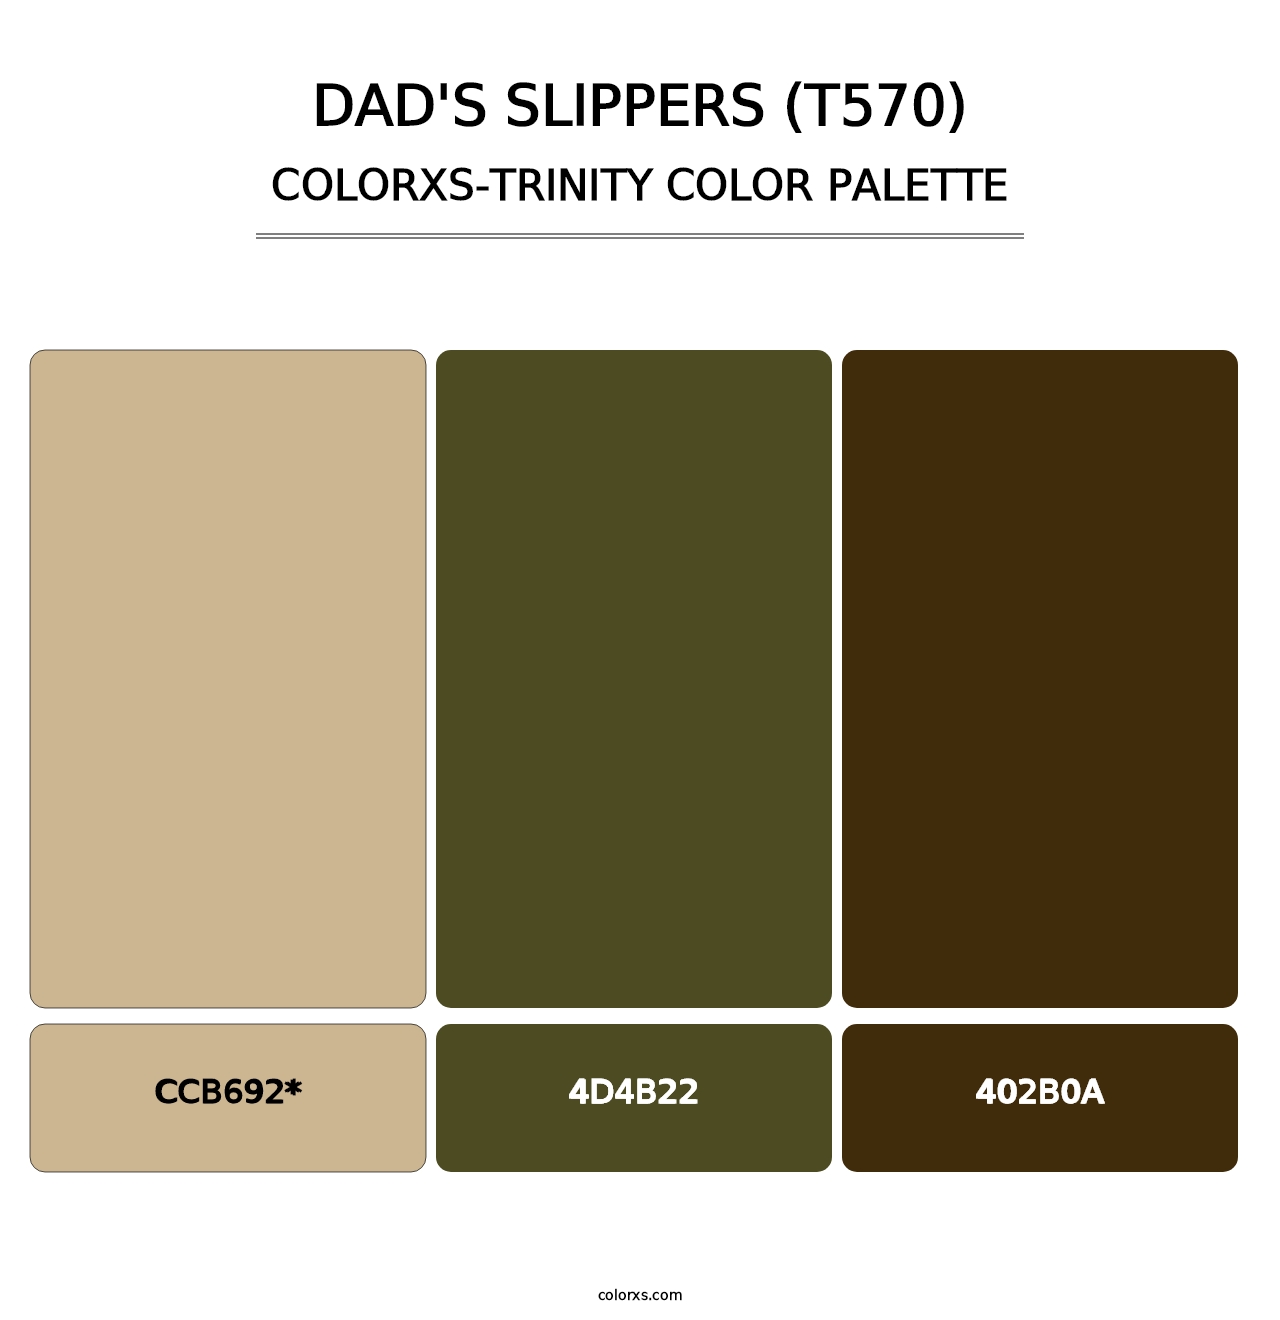 Dad's Slippers (T570) - Colorxs Trinity Palette